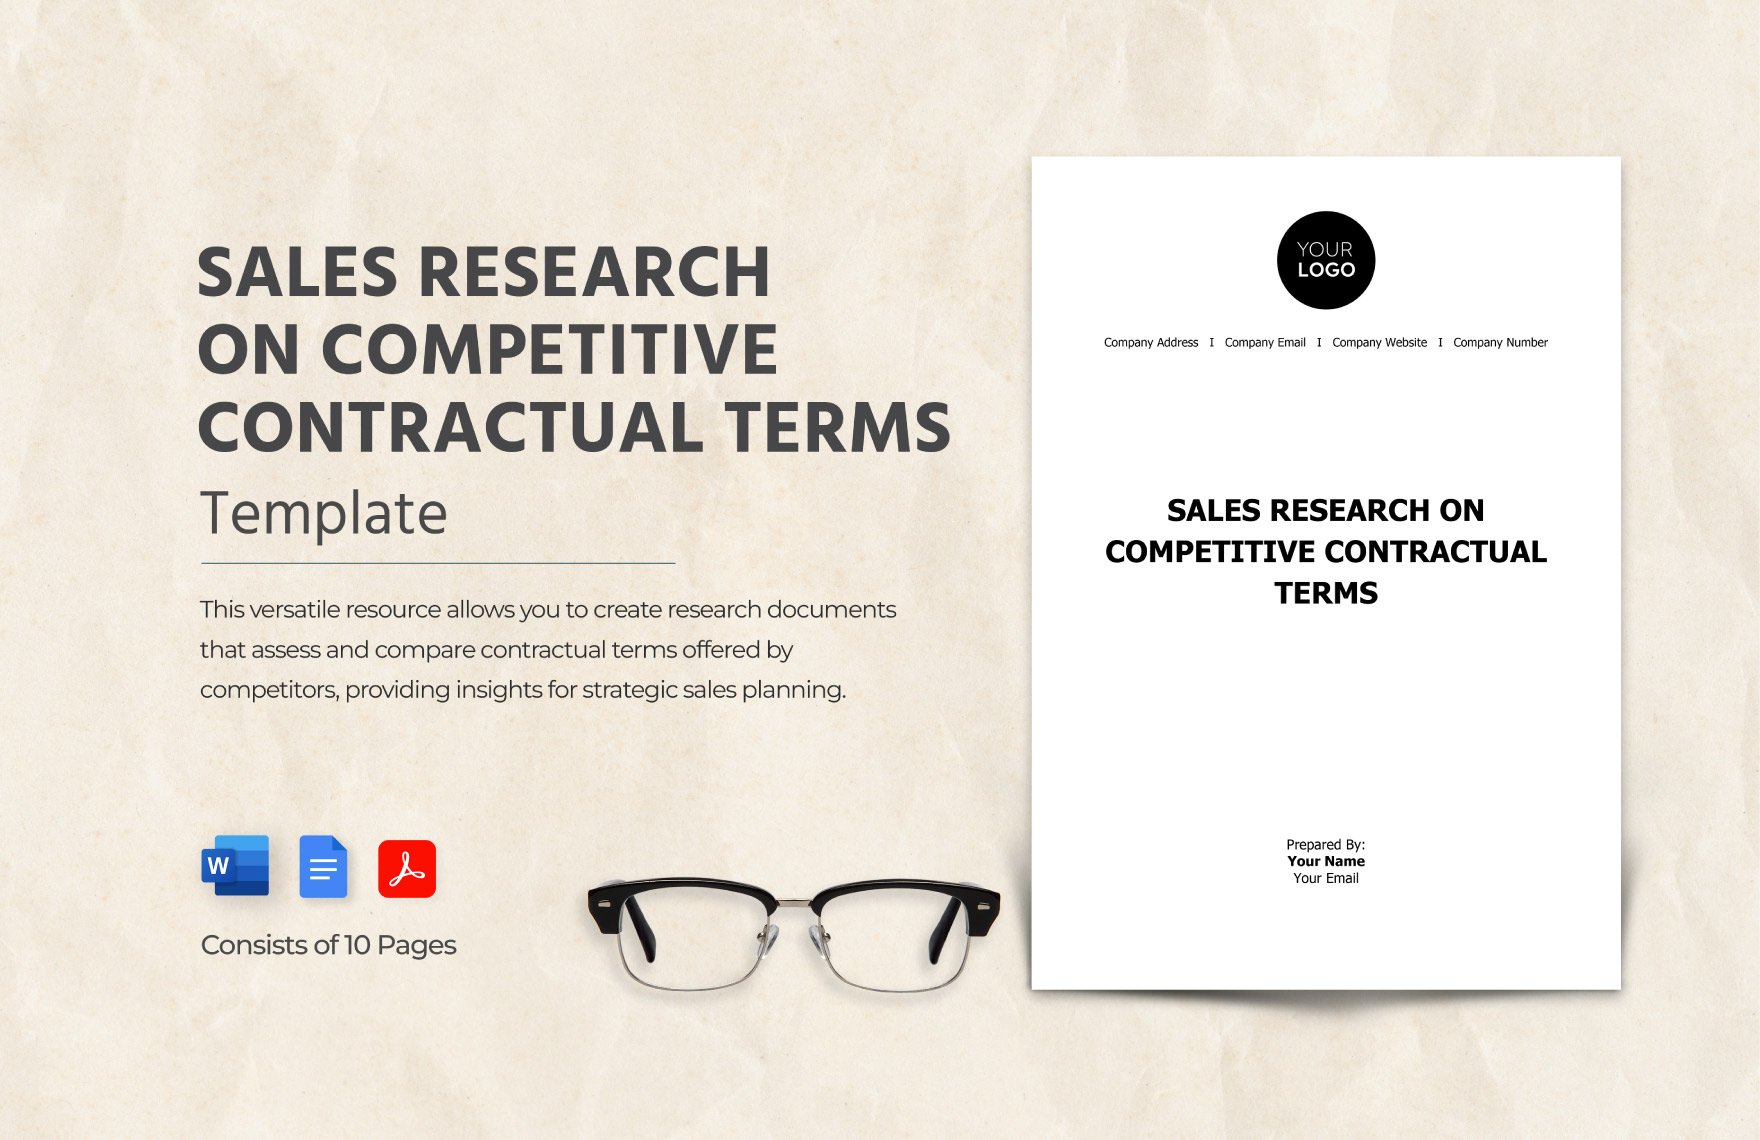 Sales Research on Competitive Contractual Terms Template